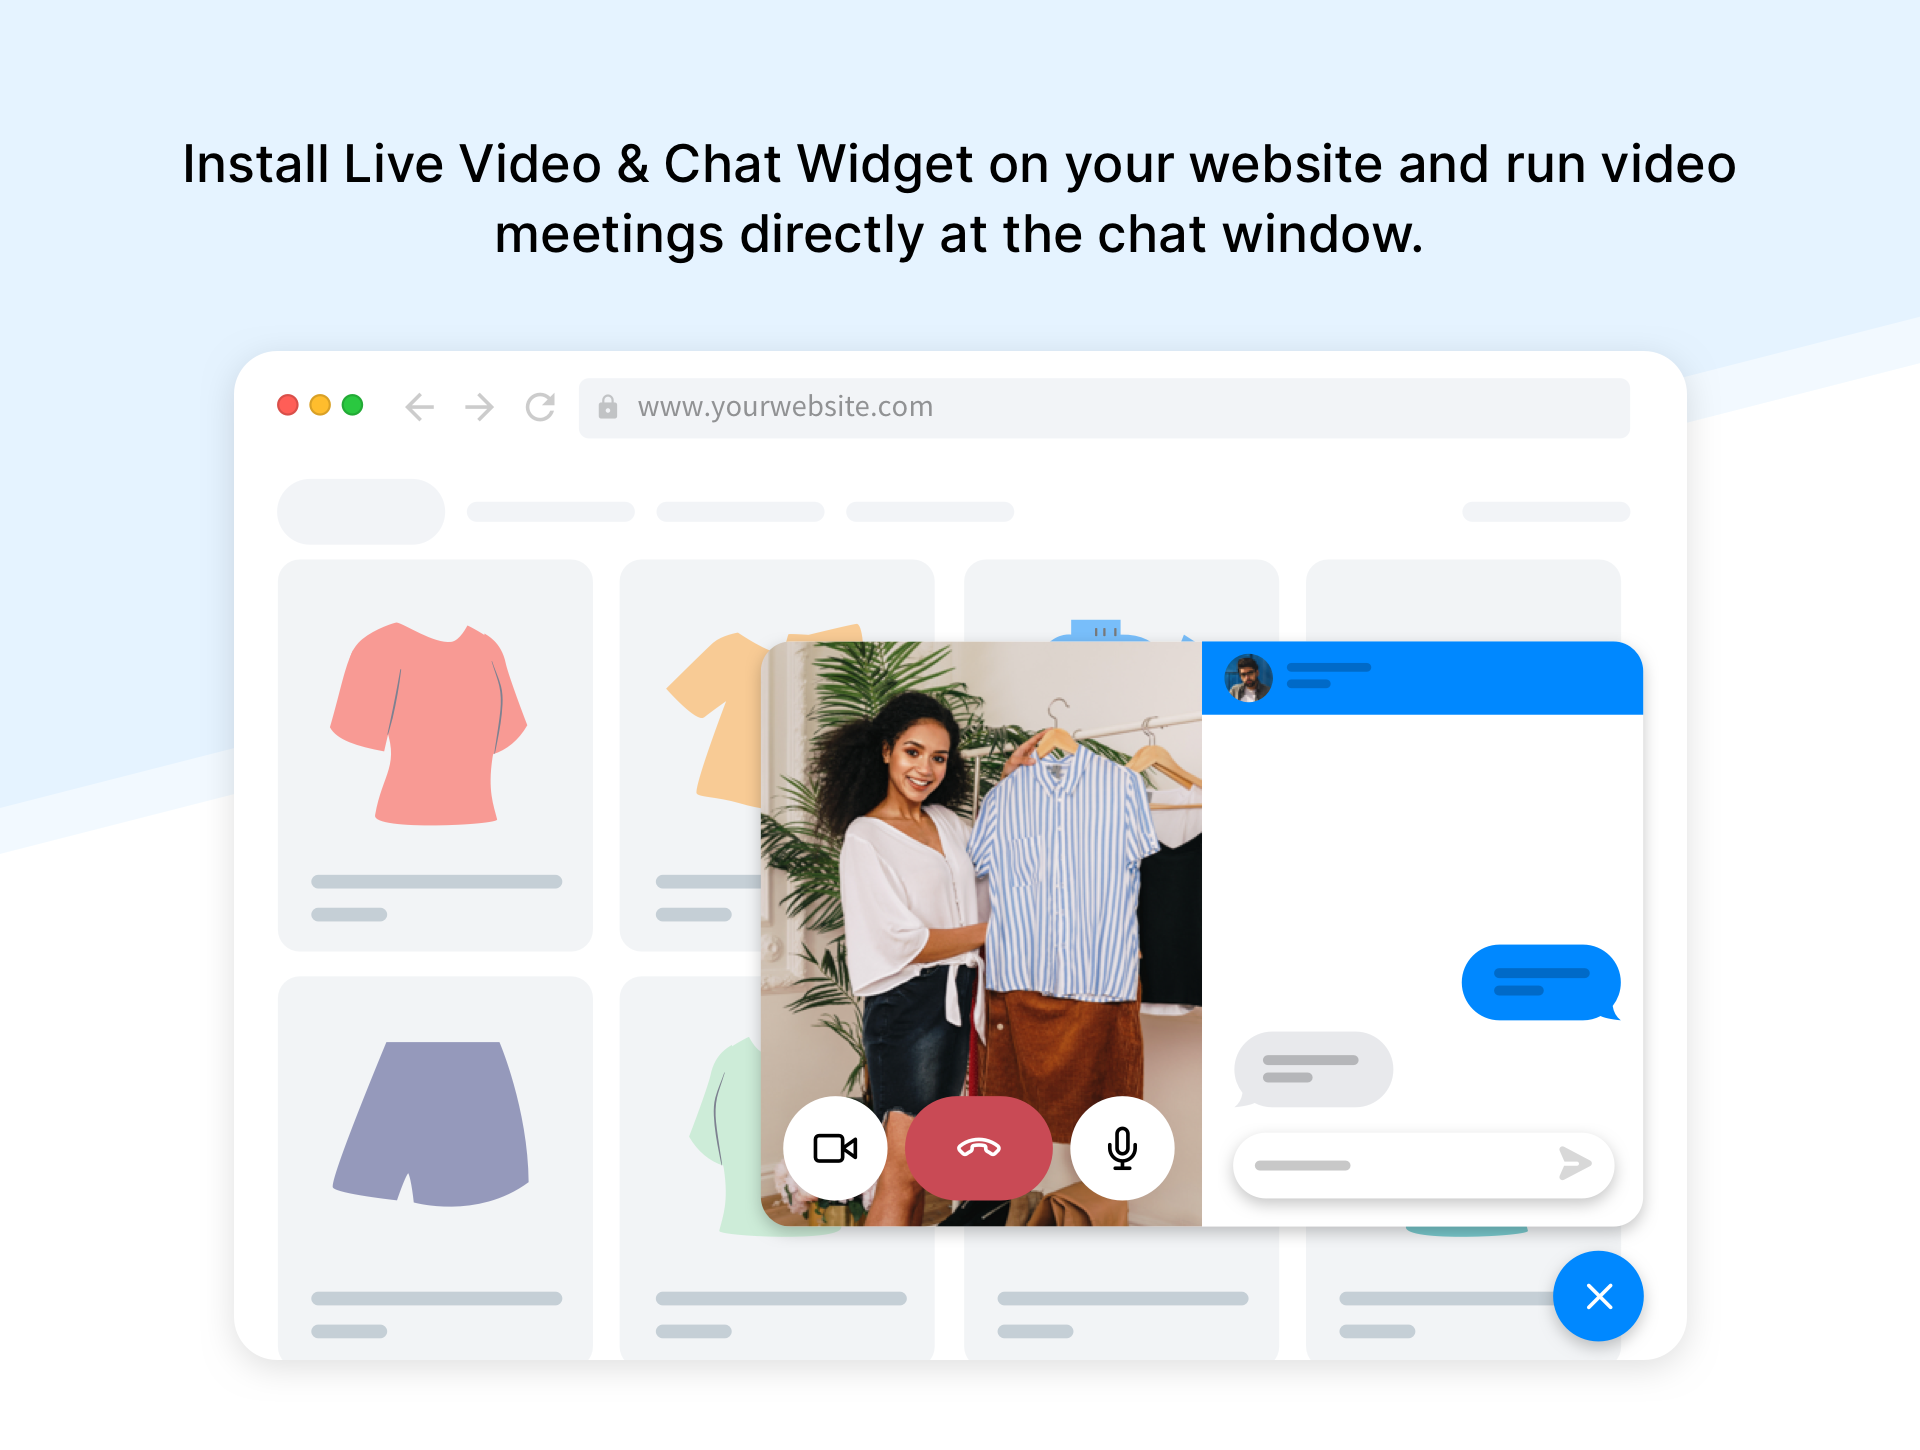 Live video & chat widget allows to run video meeting directly in the chat window. WordPress plugin available.